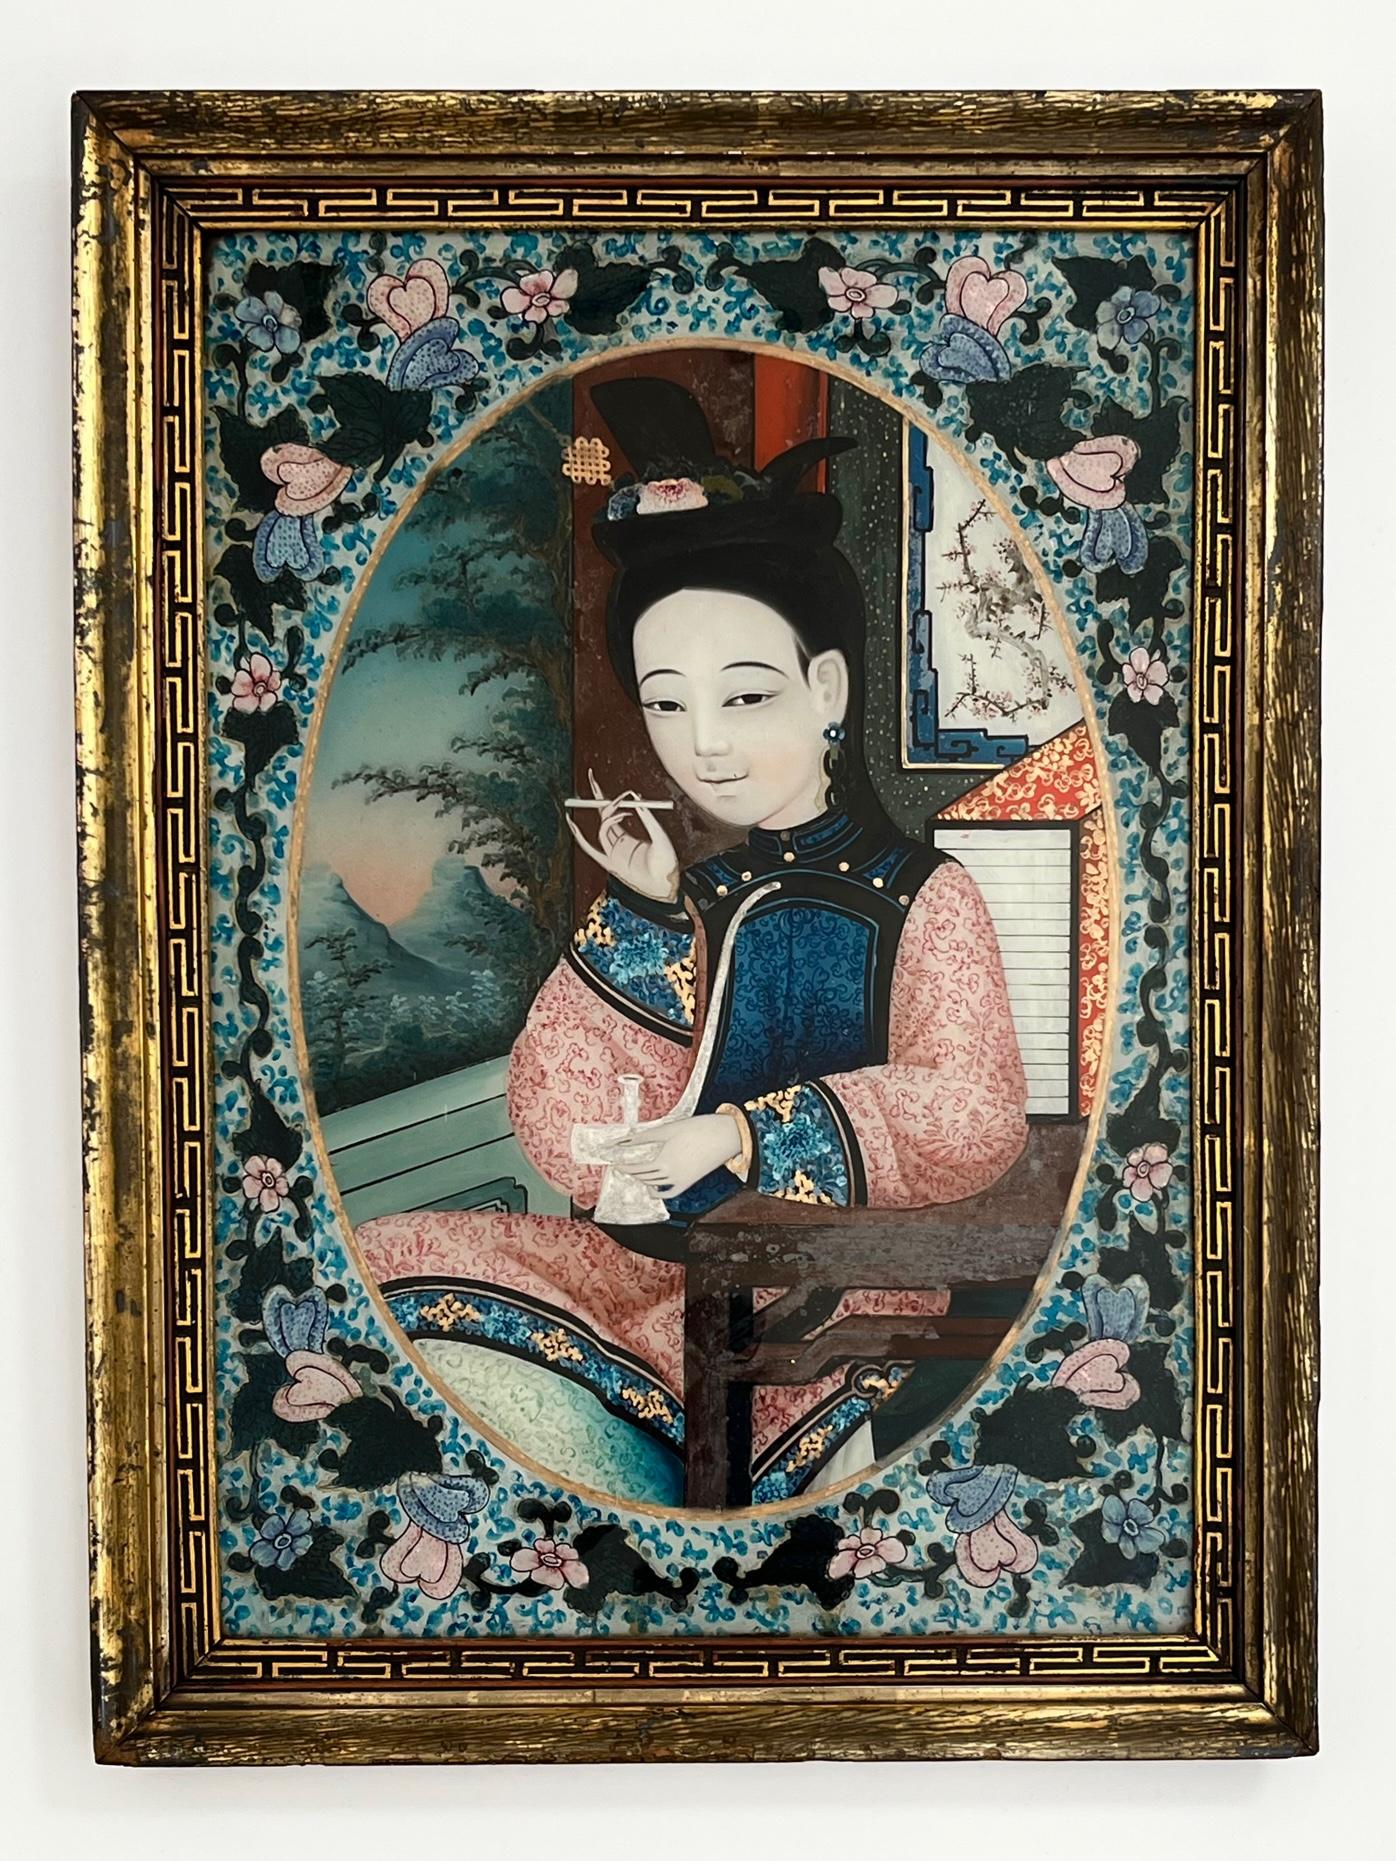 A wonderful and extremely rare last quarter 19th century Chinese export for the Anglo-Indian market reverse glass portrait painting of an opium-smoking maiden or young lady painted in oval and sat in an interior with a 'stem' in her upraised right